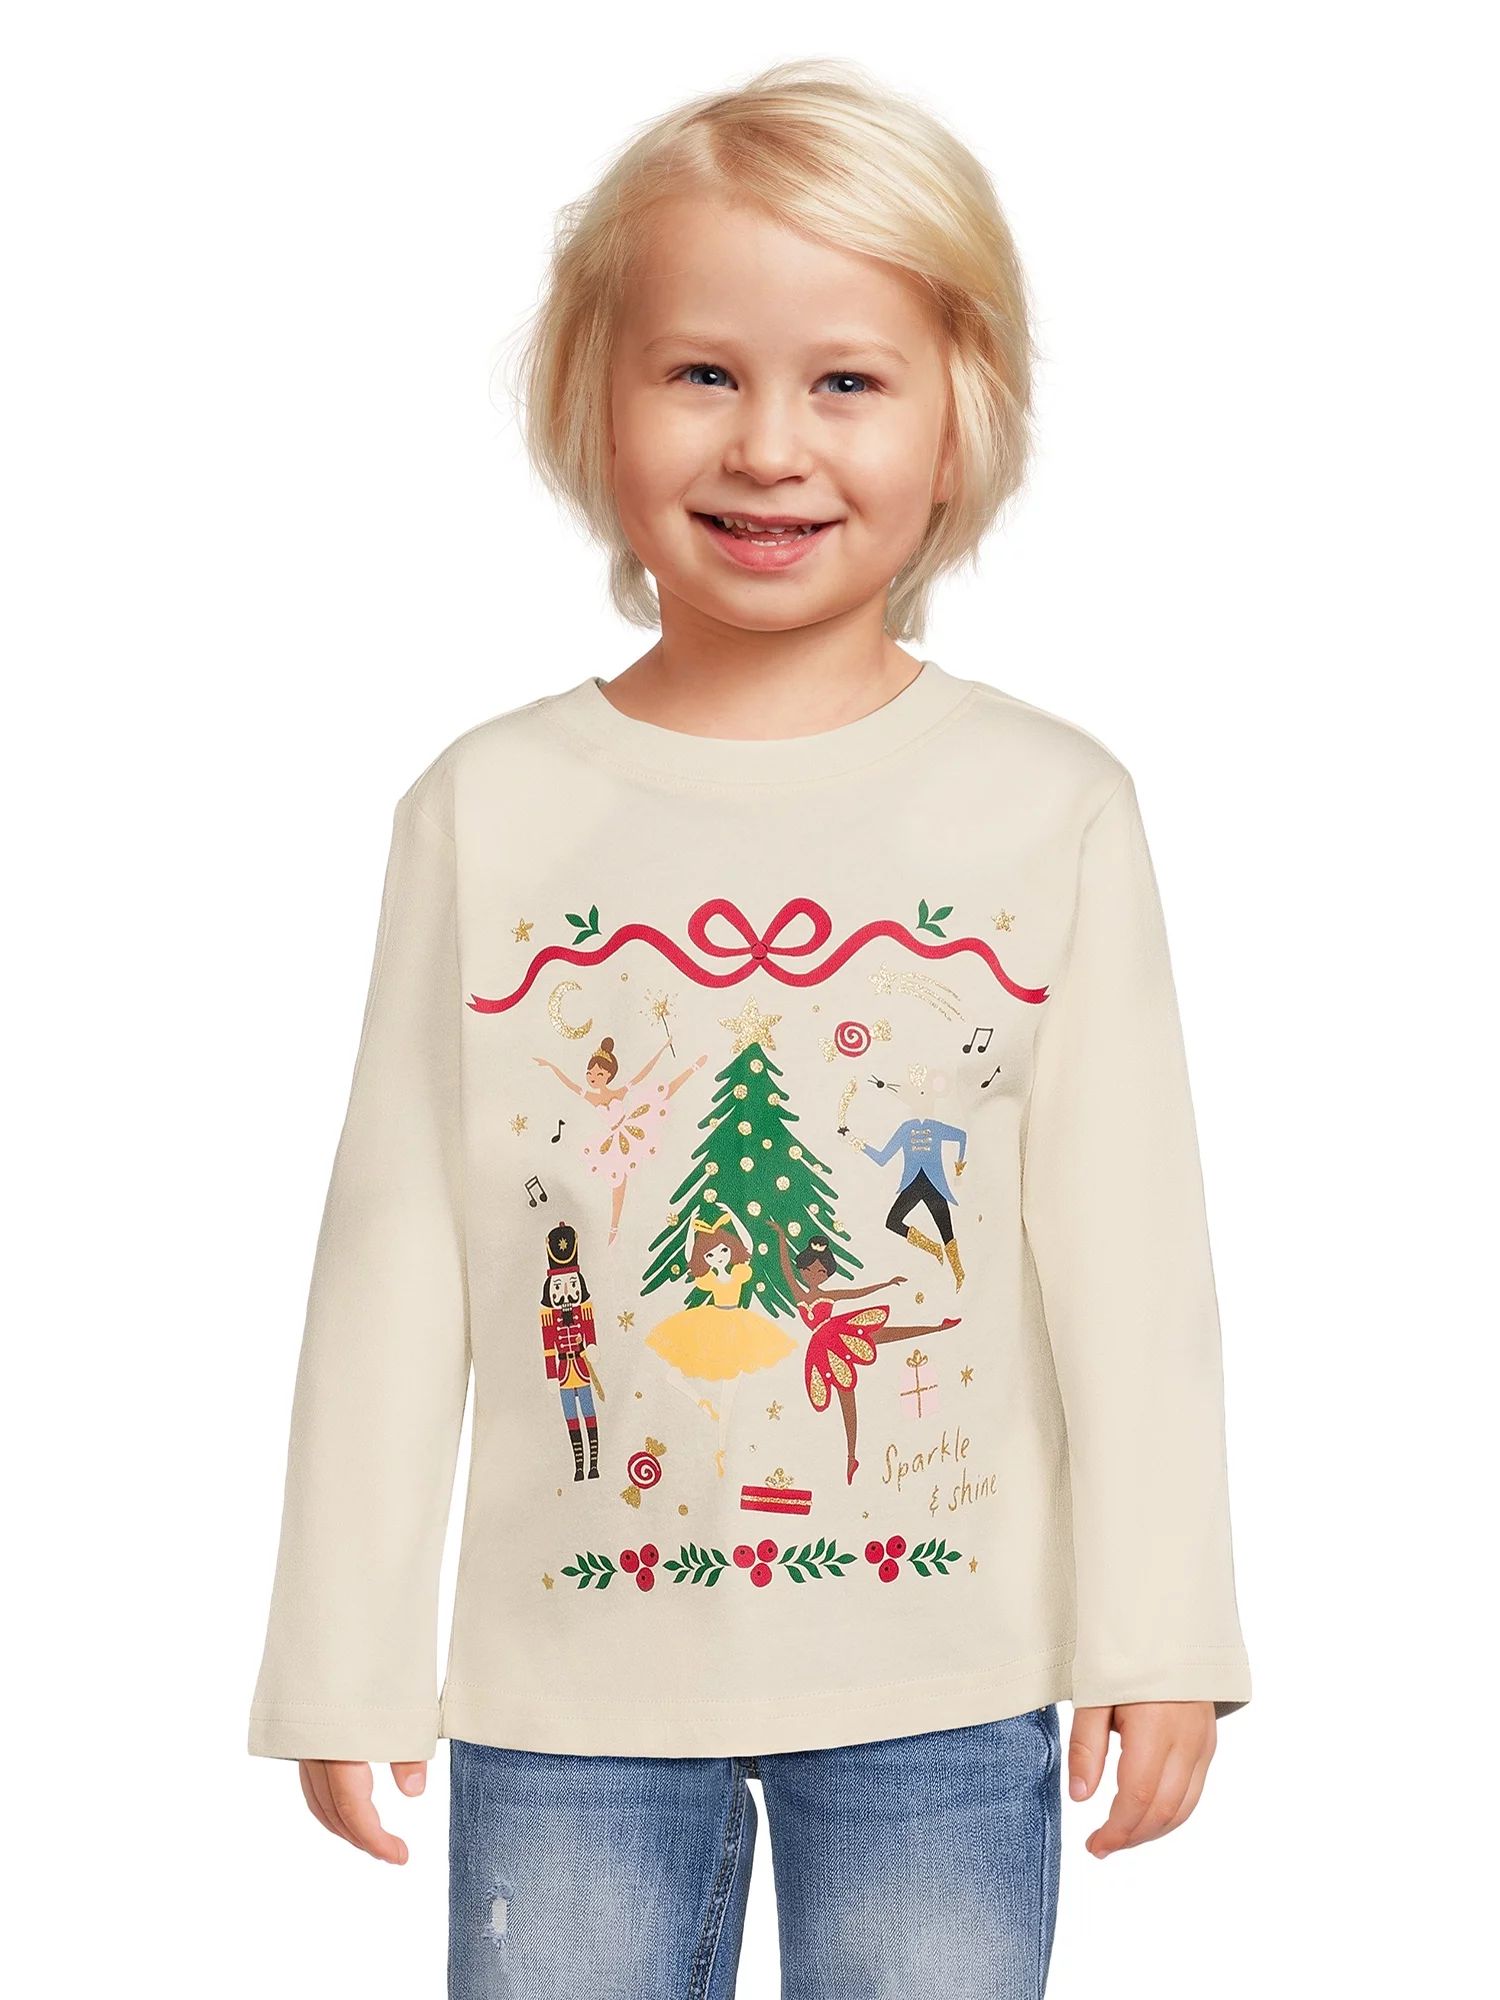 Holiday Time Toddler Girl Christmas Long Sleeve T-Shirt, Sizes 12M-5T | Walmart (US)